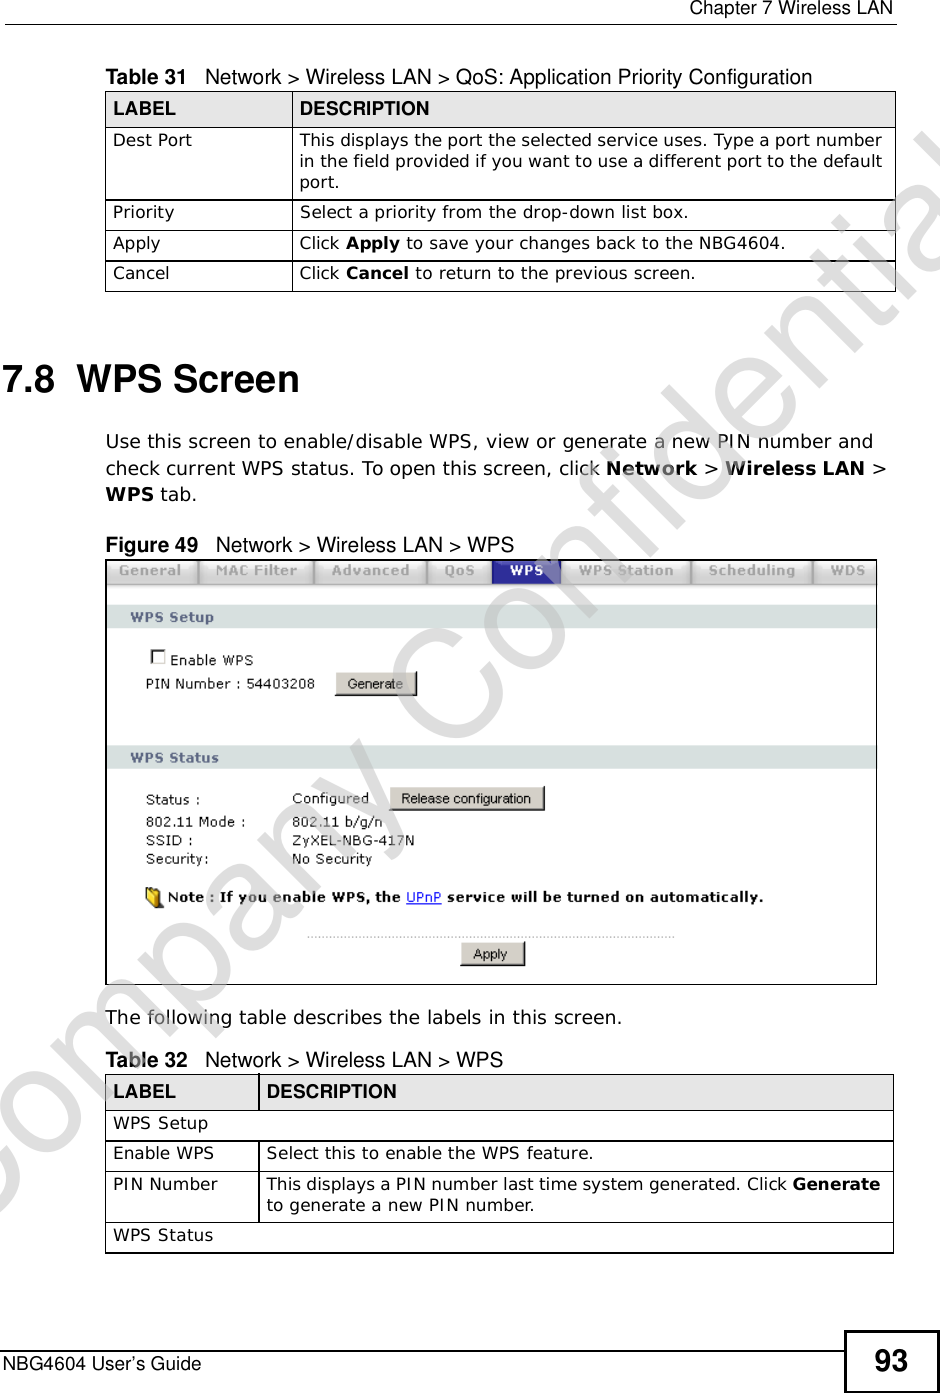  Chapter 7Wireless LANNBG4604 User’s Guide 937.8  WPS ScreenUse this screen to enable/disable WPS, view or generate a new PIN number and check current WPS status. To open this screen, click Network &gt;Wireless LAN &gt; WPS tab.Figure 49   Network &gt; Wireless LAN &gt; WPSThe following table describes the labels in this screen.Dest PortThis displays the port the selected service uses. Type a port number in the field provided if you want to use a different port to the default port.PrioritySelect a priority from the drop-down list box. Apply Click Apply to save your changes back to the NBG4604.Cancel Click Cancel to return to the previous screen.Table 31   Network &gt; Wireless LAN &gt; QoS: Application Priority Configuration LABEL DESCRIPTIONTable 32   Network &gt; Wireless LAN &gt; WPSLABEL DESCRIPTIONWPS SetupEnable WPS Select this to enable the WPS feature.PIN Number This displays a PIN number last time system generated. Click Generateto generate a new PIN number.WPS StatusCompany Confidential